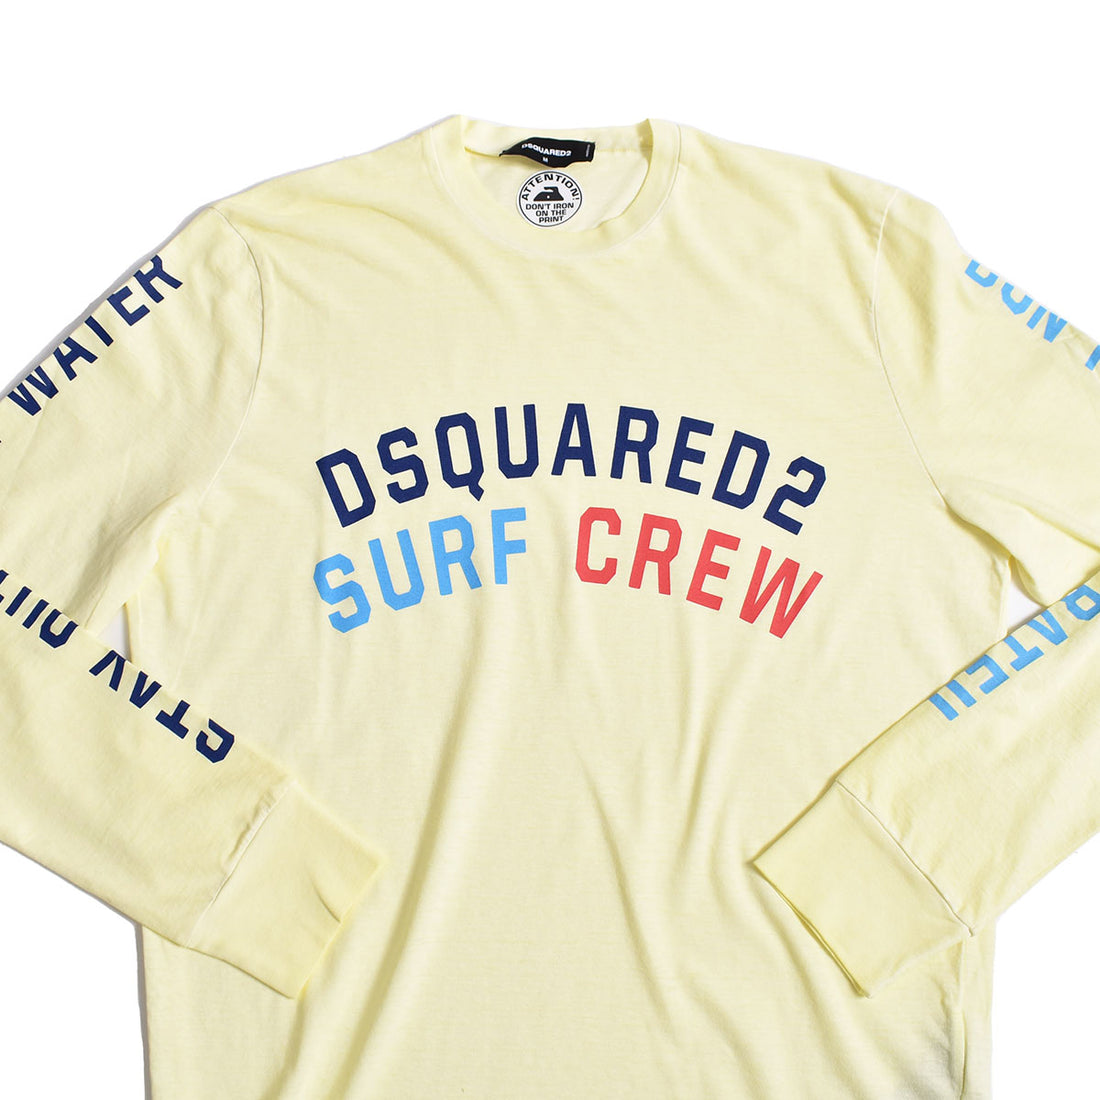 [DSQUARED2]SURF CREW L/S T-SHIRT/YELLOW(S74GD1133)